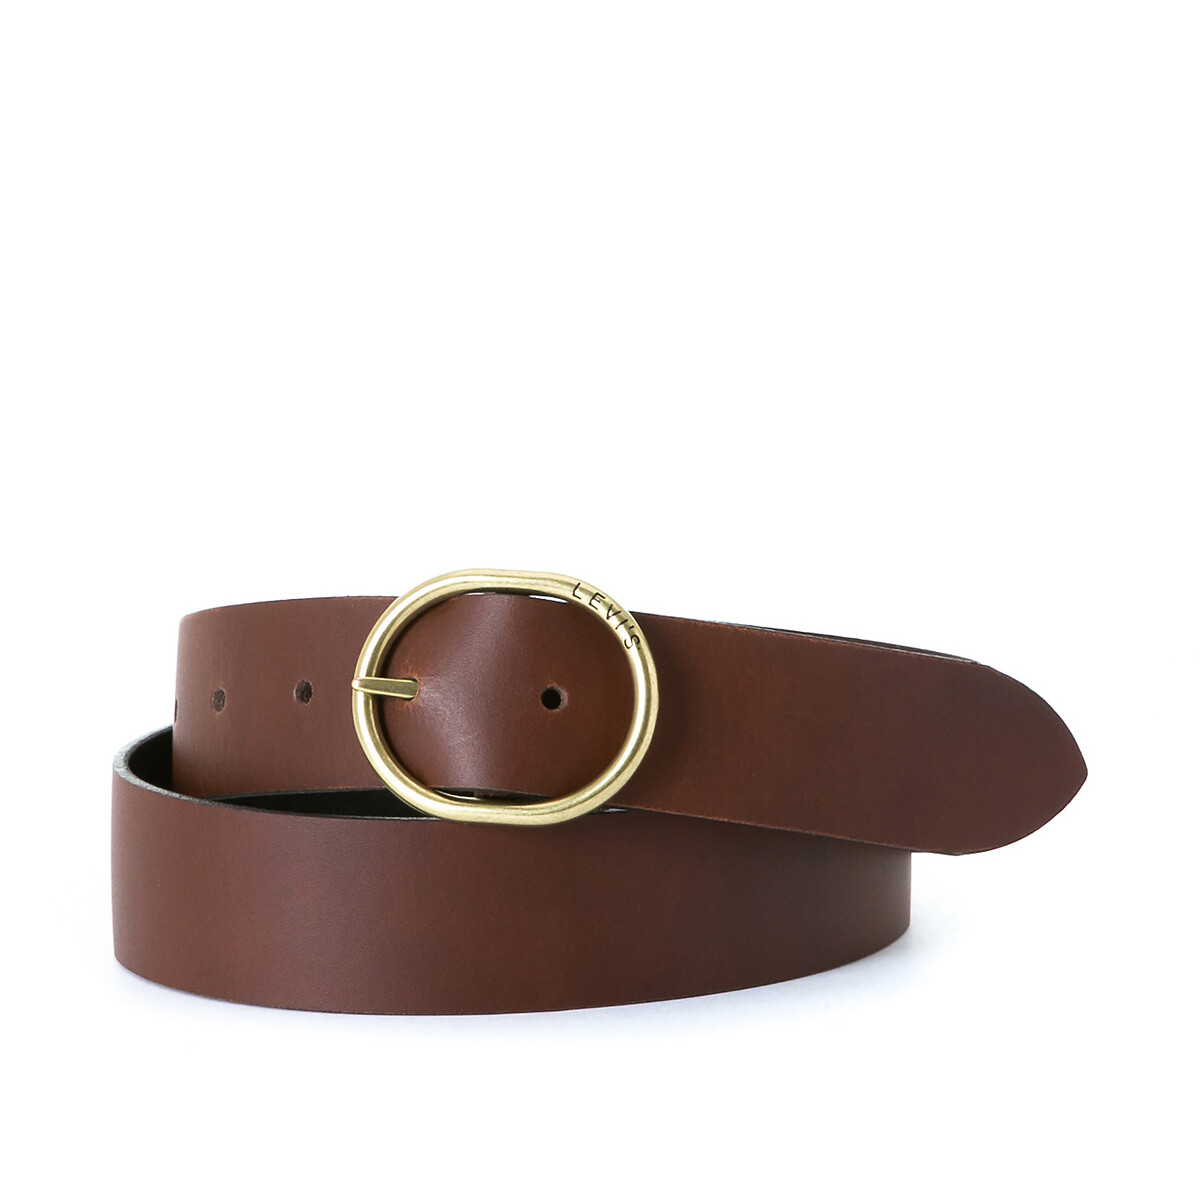 Arletha reversible belt in leather mix brown/black Levi's | La Redoute